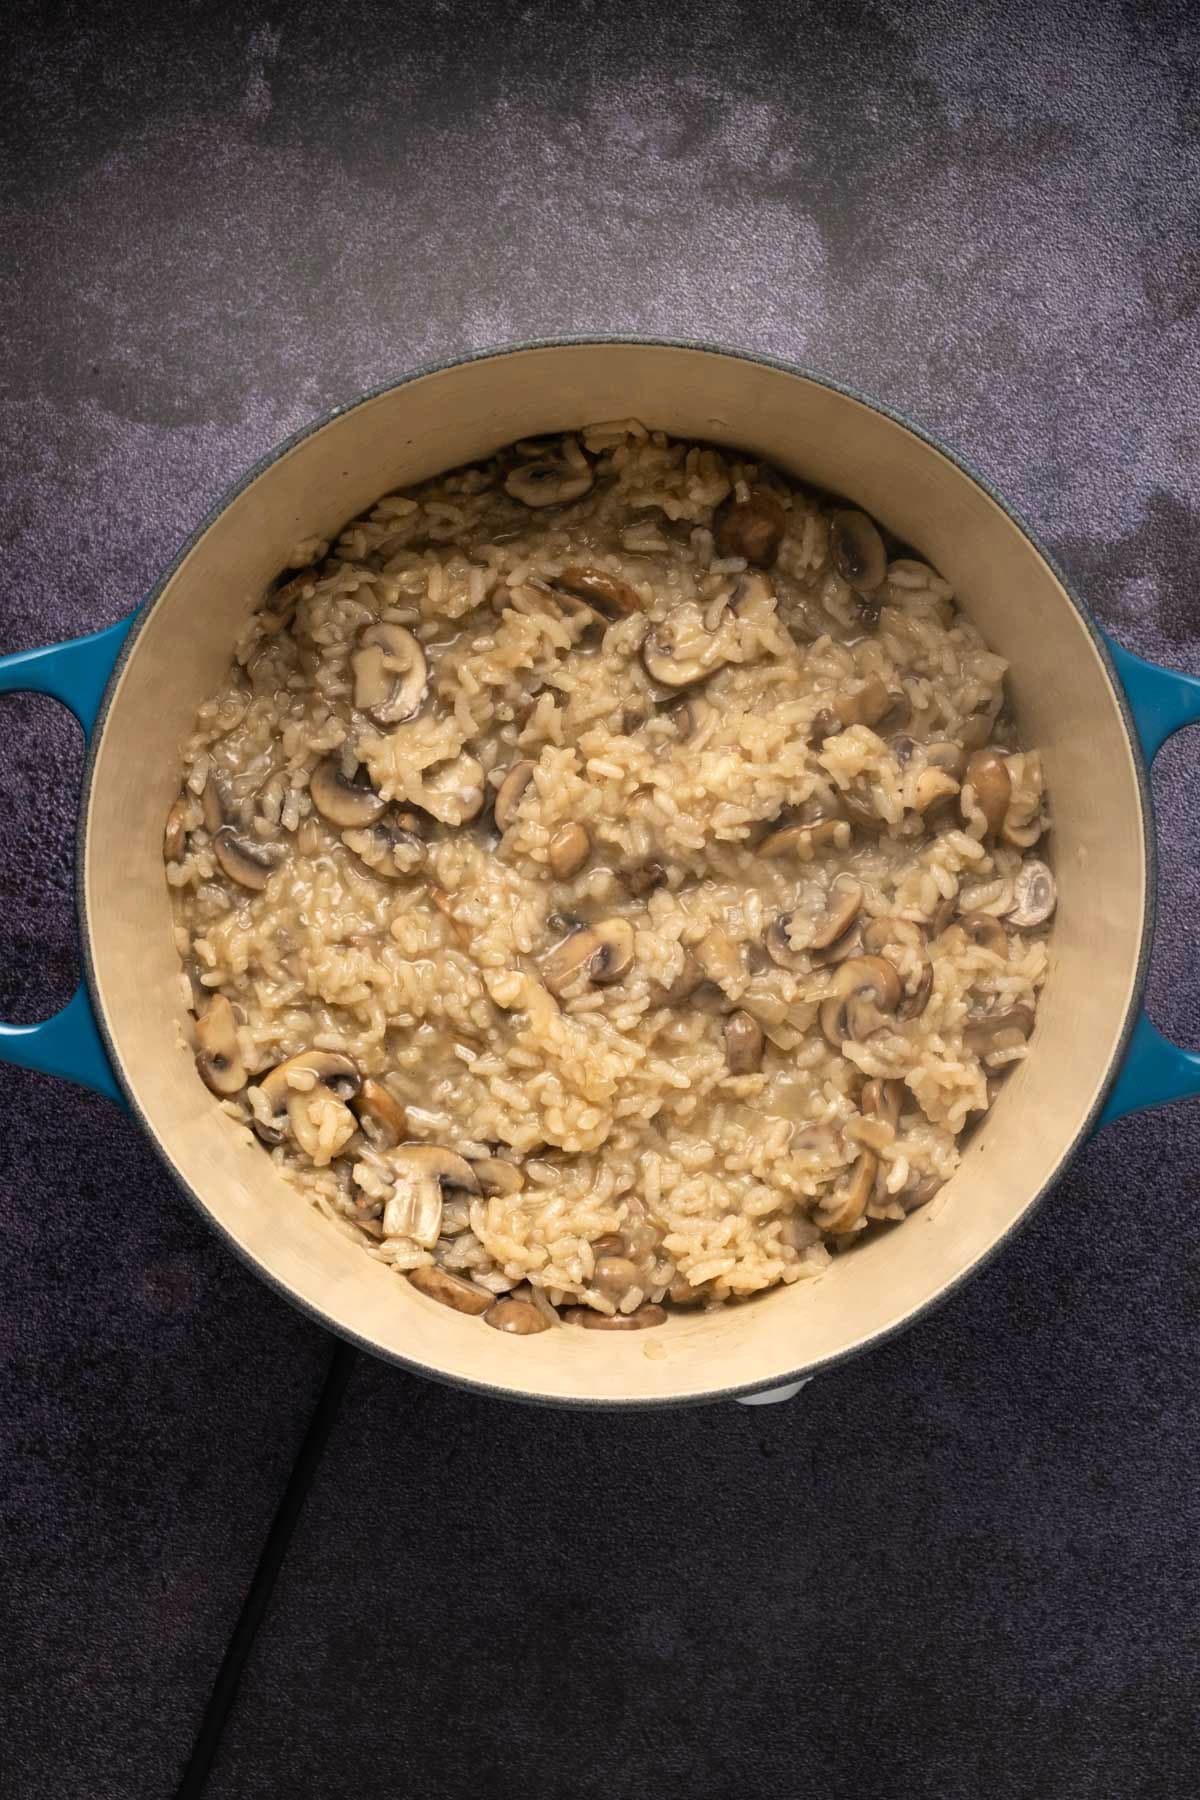 Mushroom risotto cooking in a pot.